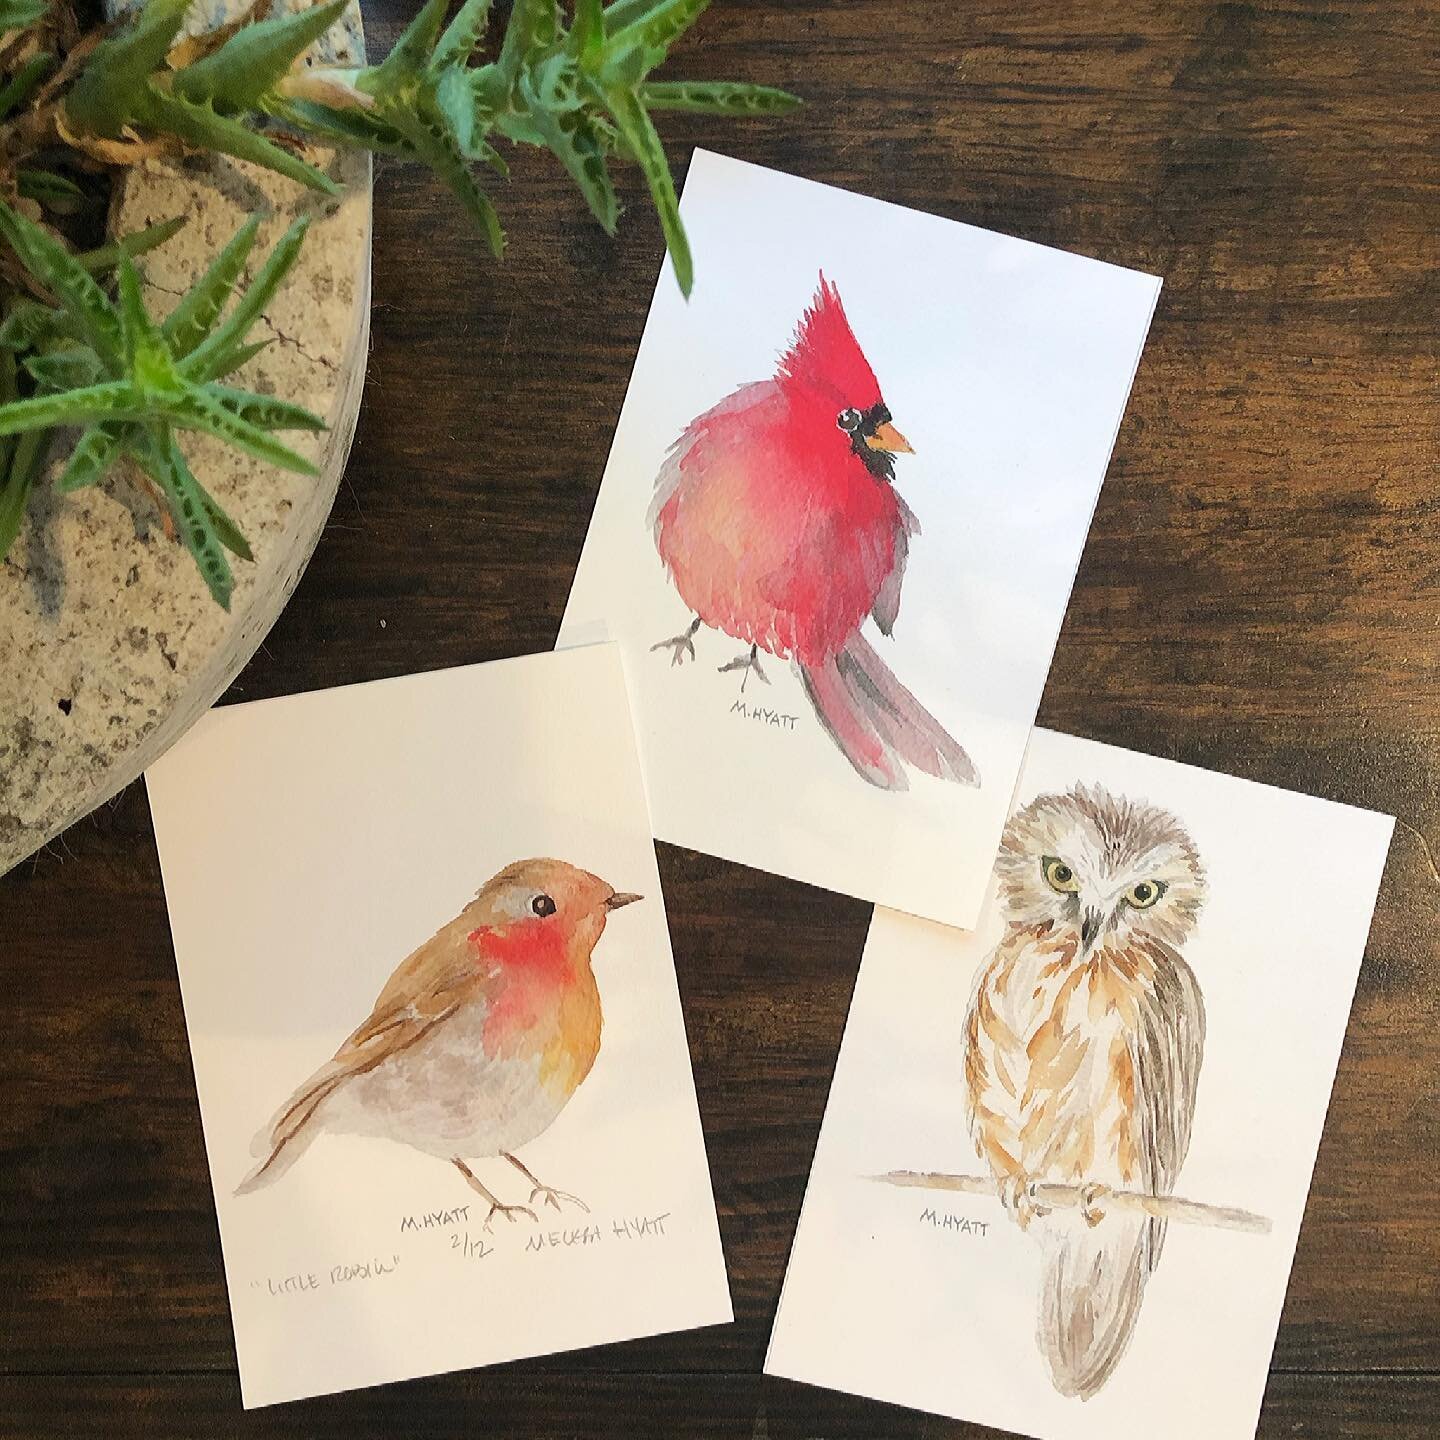 These new little bird prints will make their debut tomorrow. Shop Small Southold is happening Saturday 3/20. Come see me @beacheeky and get a sweet surprise by mentioning this post! Happy almost Spring! #cardinal #owl #robin #birds #wallart #walldeco